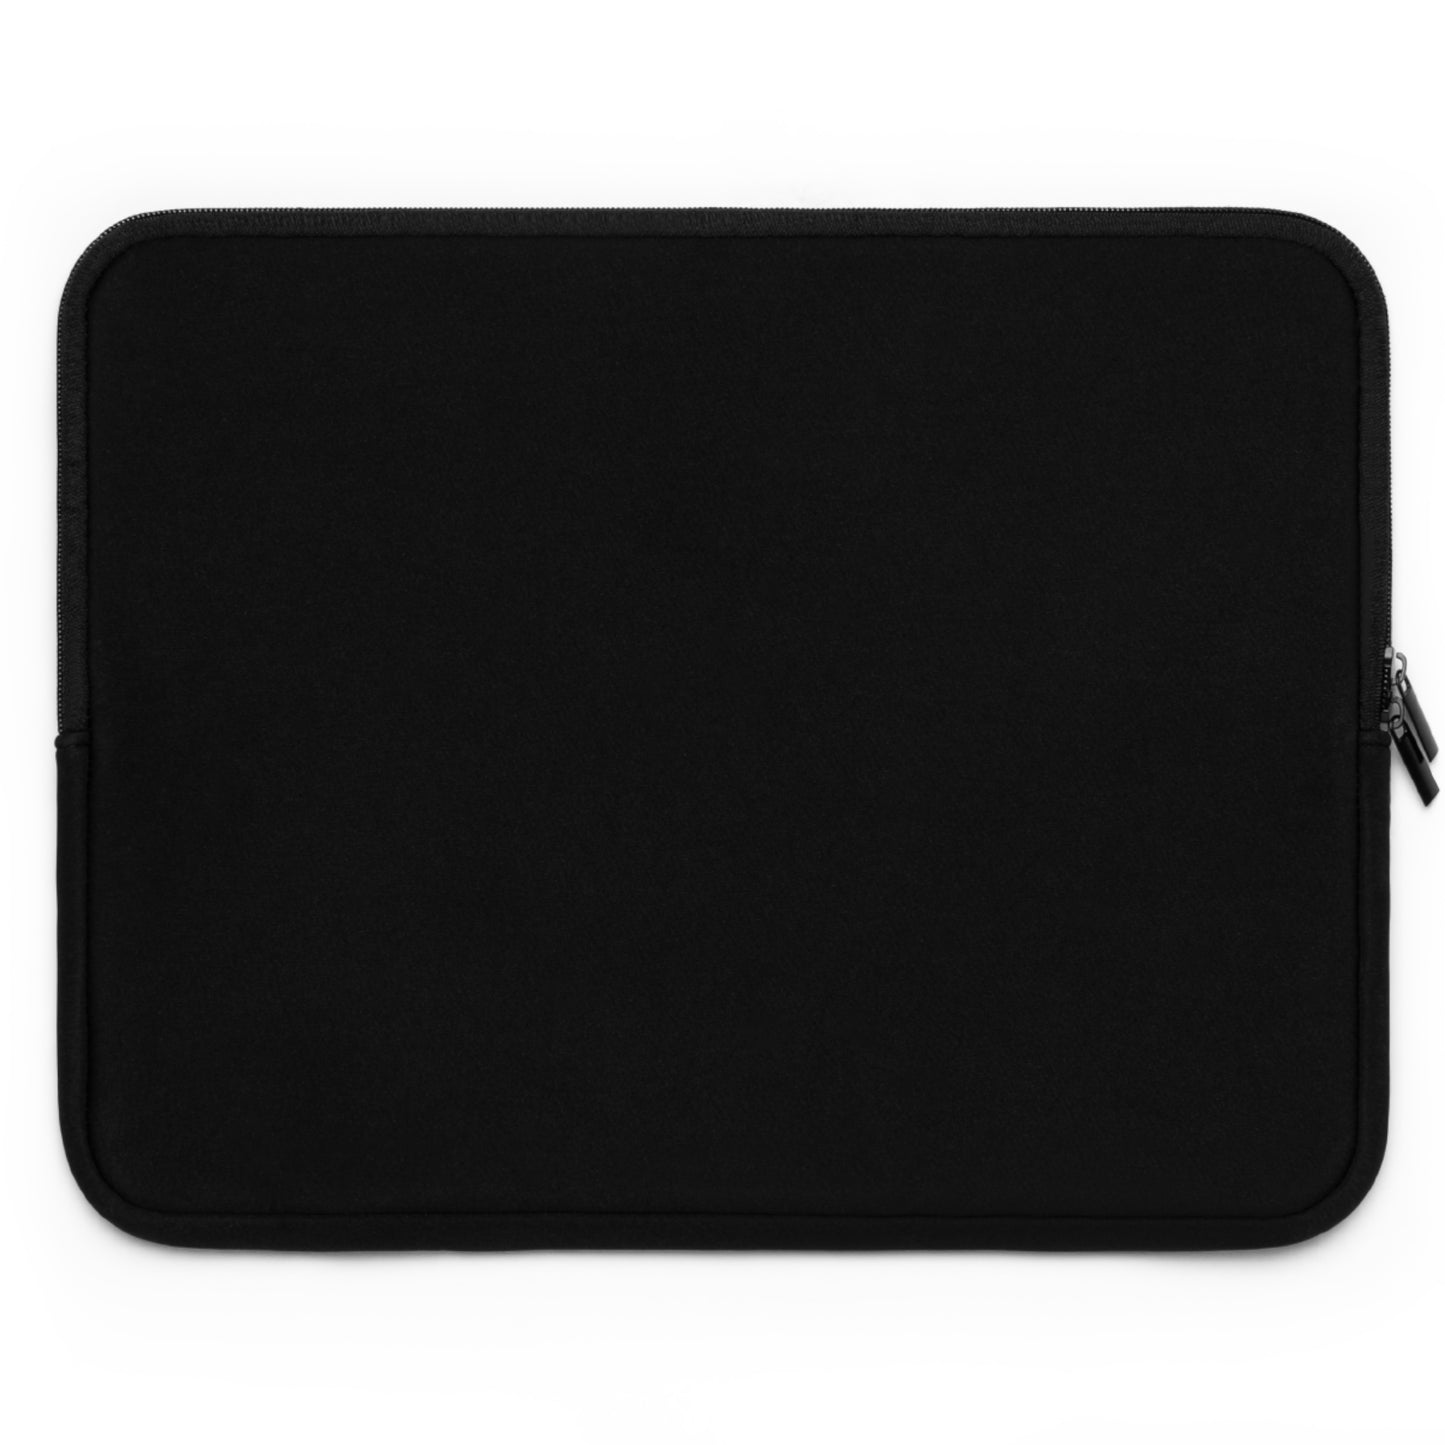 The Ideal City Laptop Sleeve